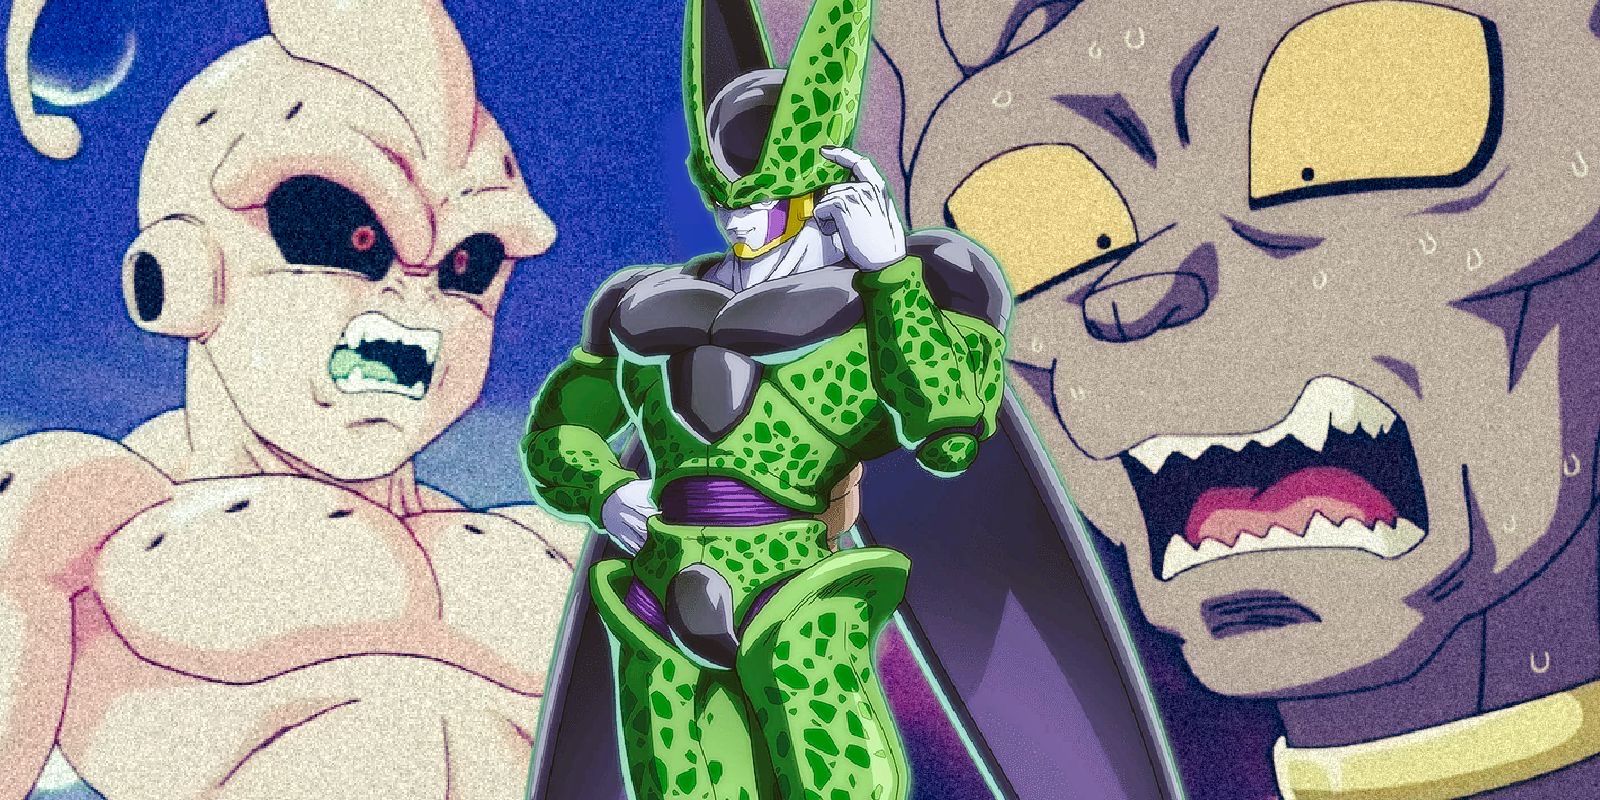 Perfect Cell from DBZ scares Kid Buu and Beerus in Super